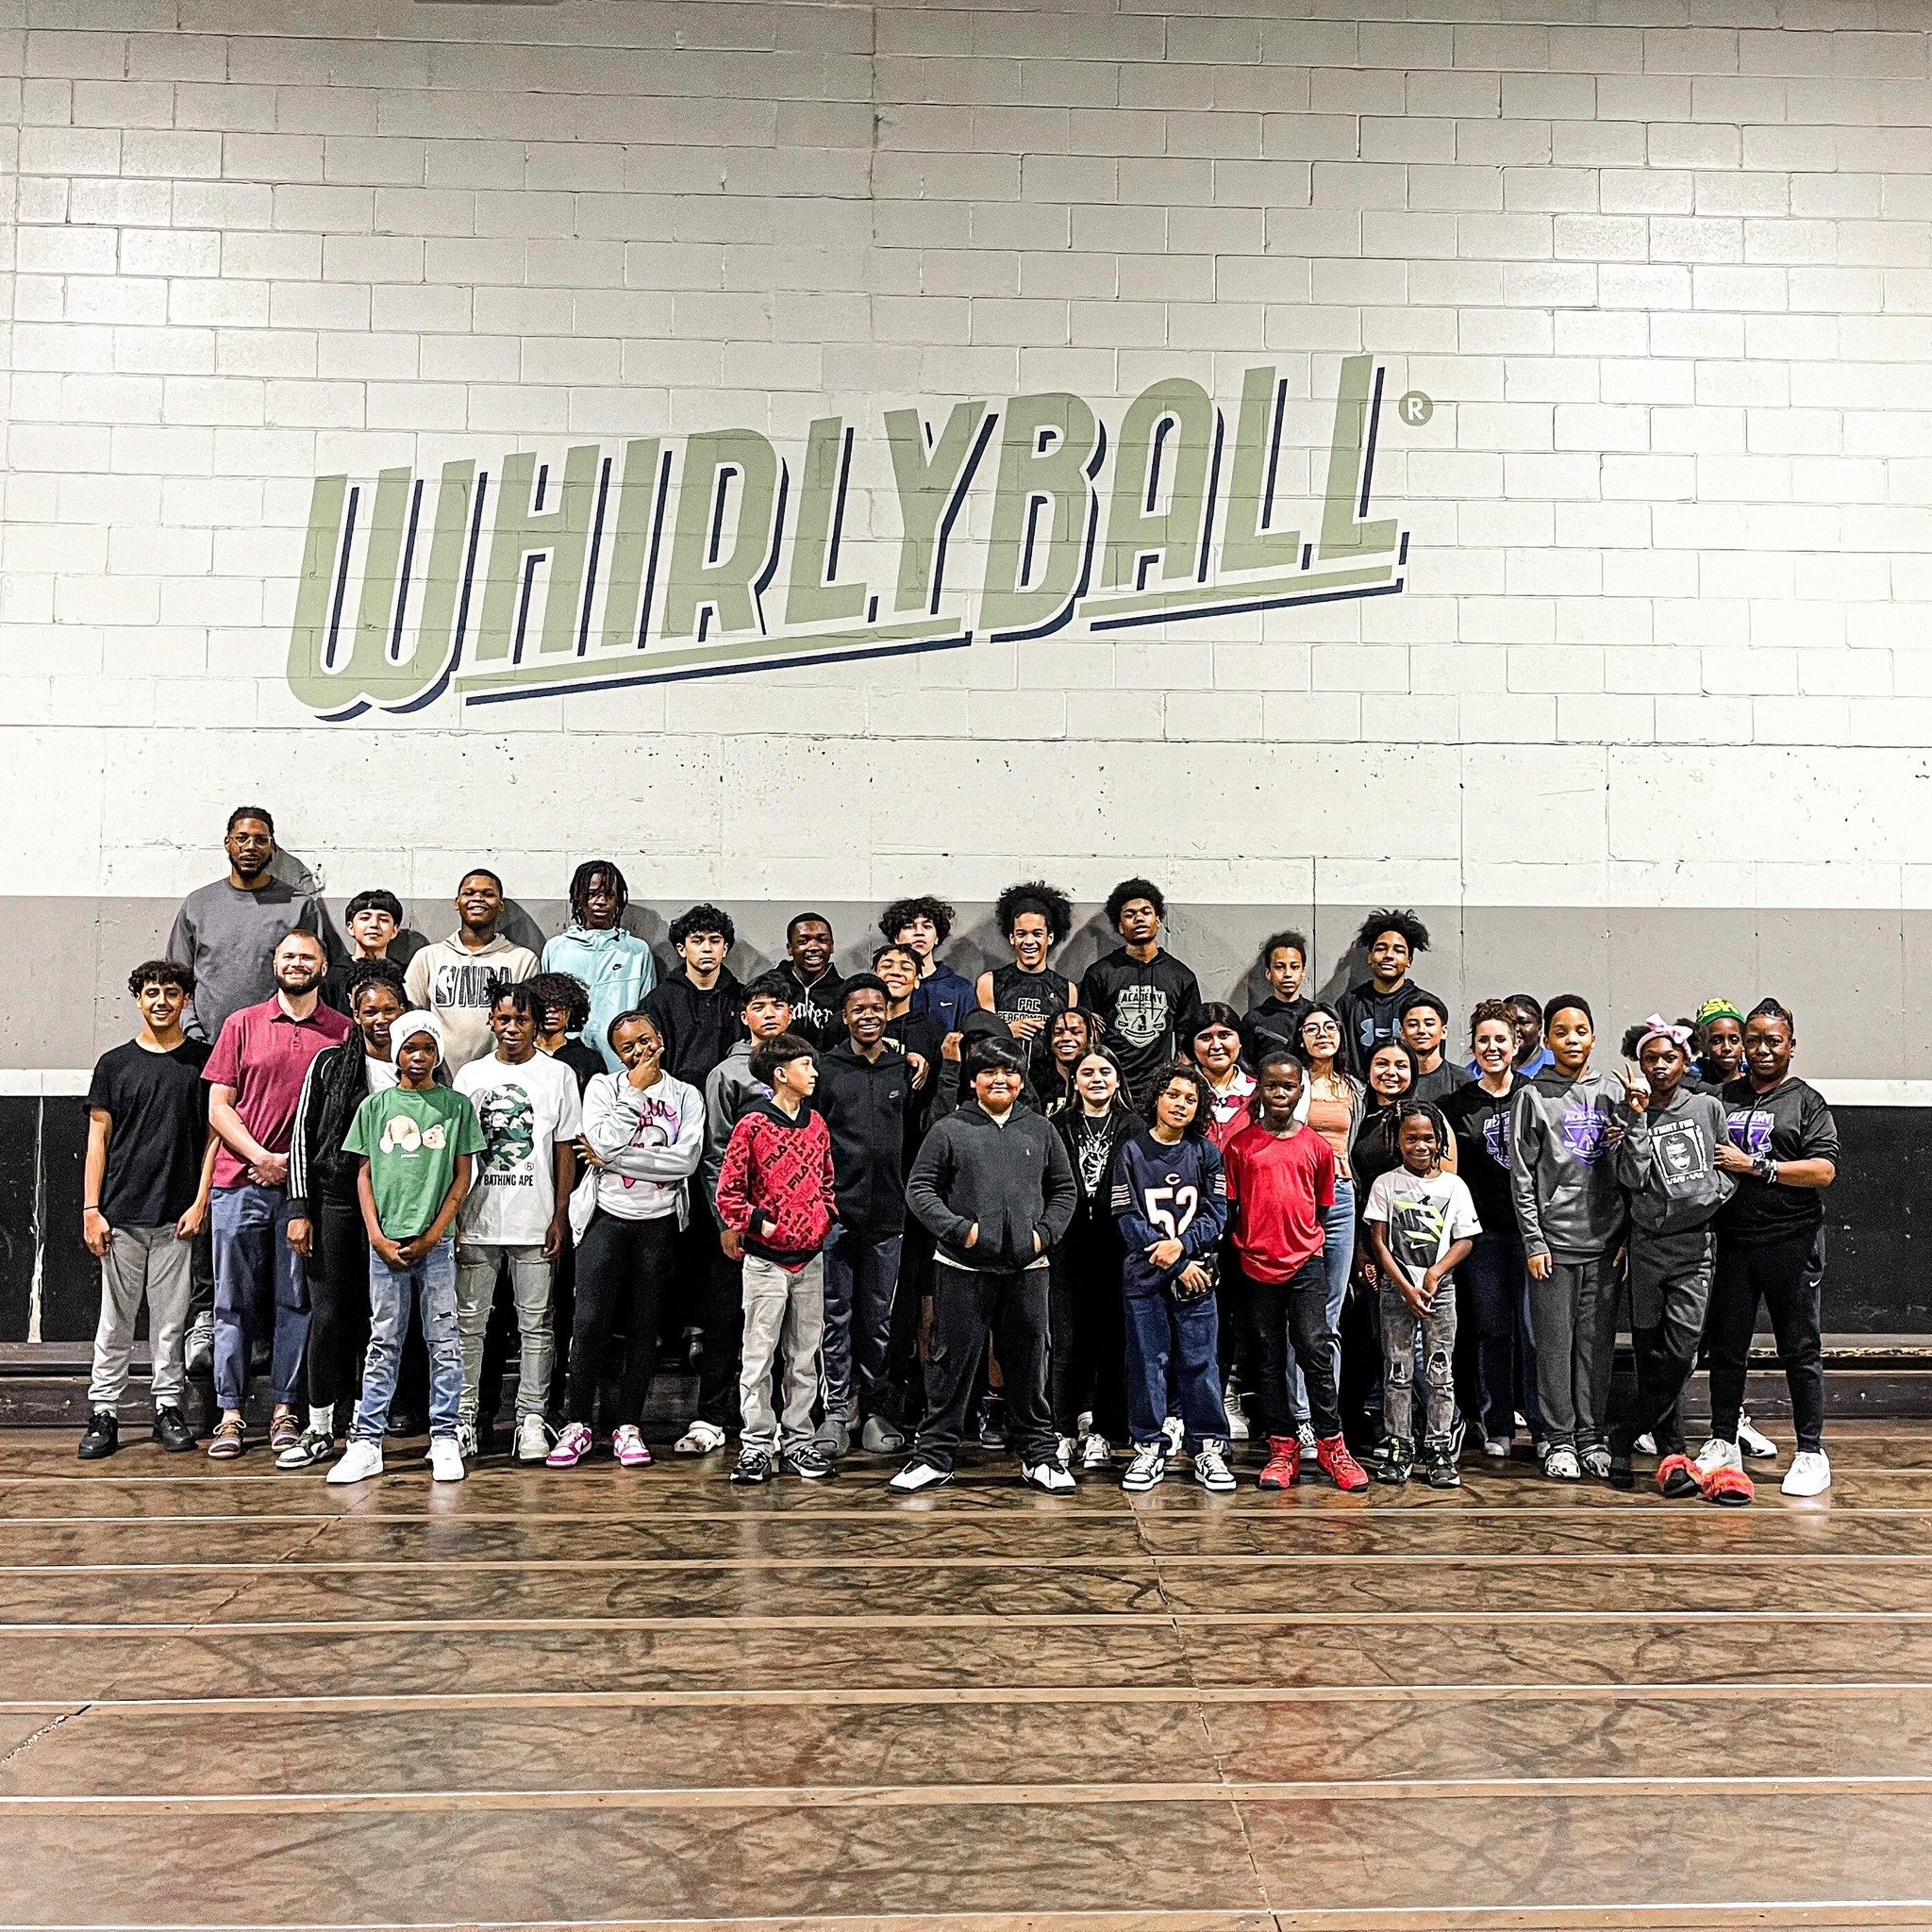 We wrapped up our afterschool program today with a trip to Whirly Ball for games, laser tag, pizza, and lots of fun.  These student-athletes had an amazing school year filled with academic growth and development on the court. We&rsquo;re proud of all